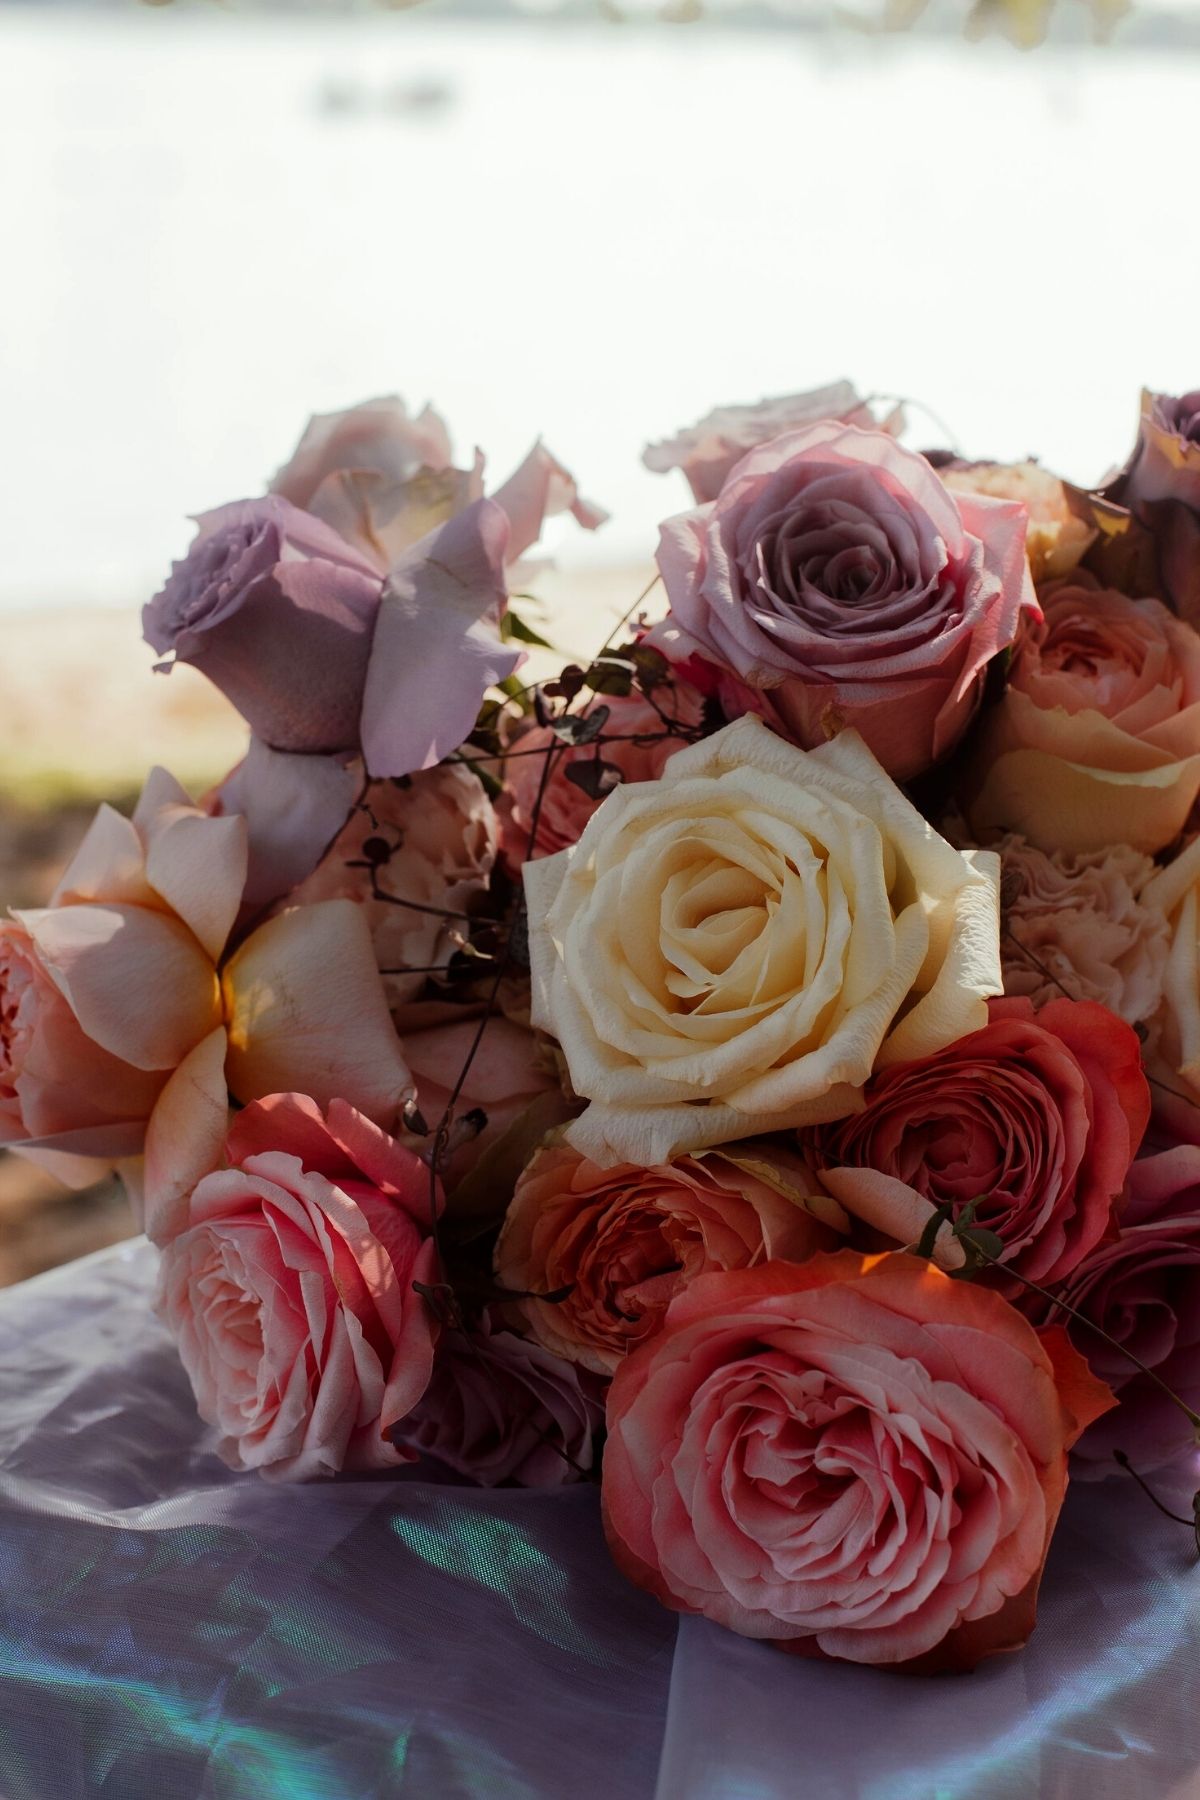 Inspirational Shoot With Gorgeous Decofresh Roses and Carnations - Blog on Thursd (40)